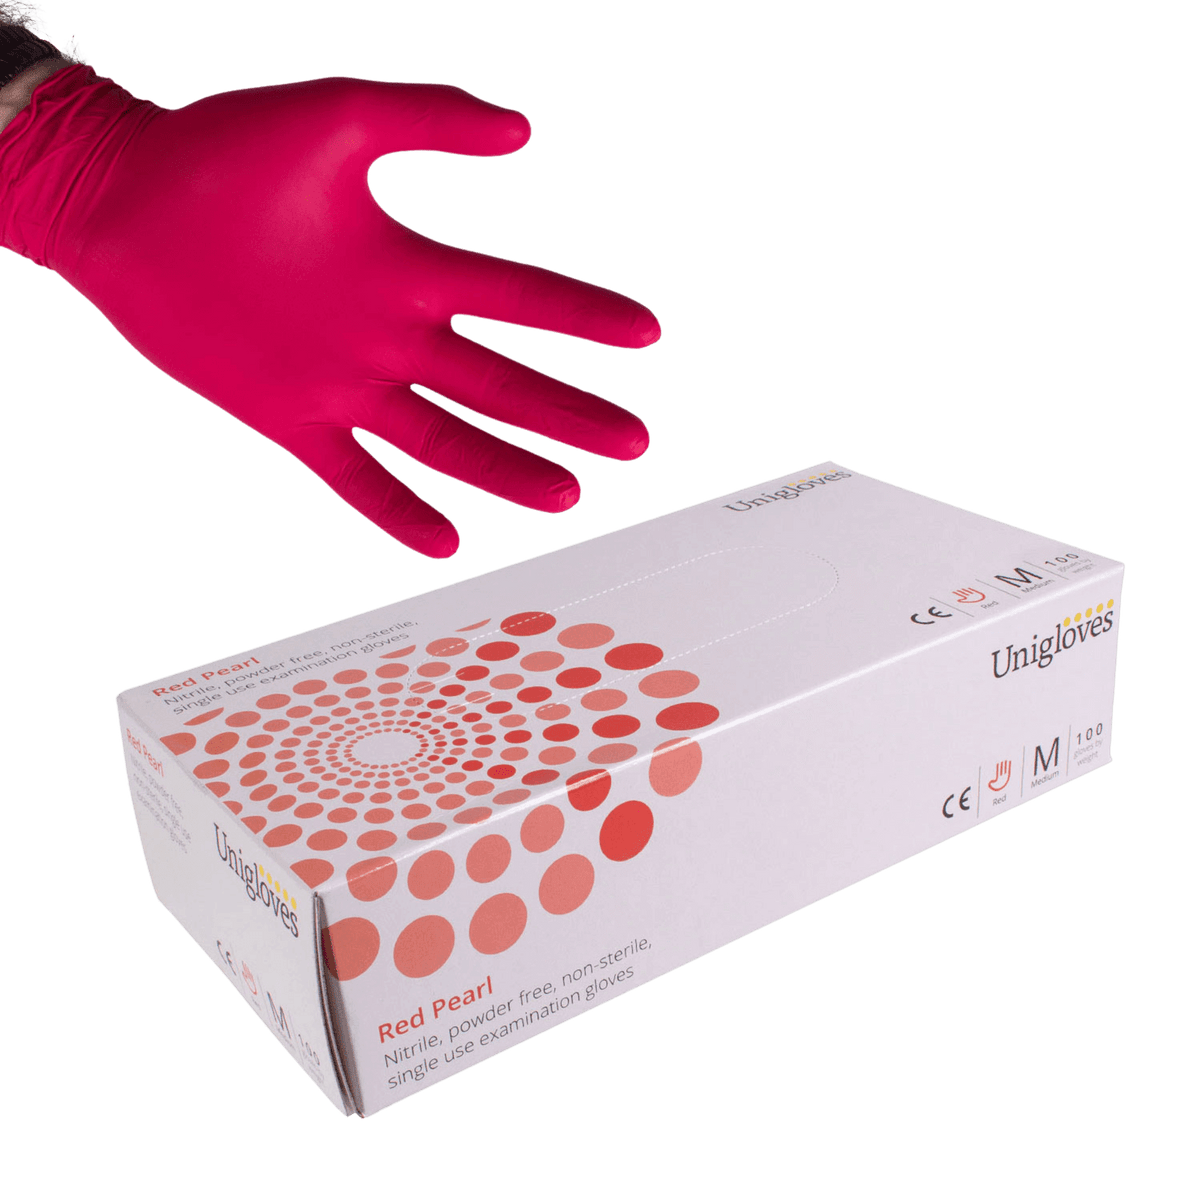 Unigloves Red Pearl Nitrile gloves - box of 100 pieces